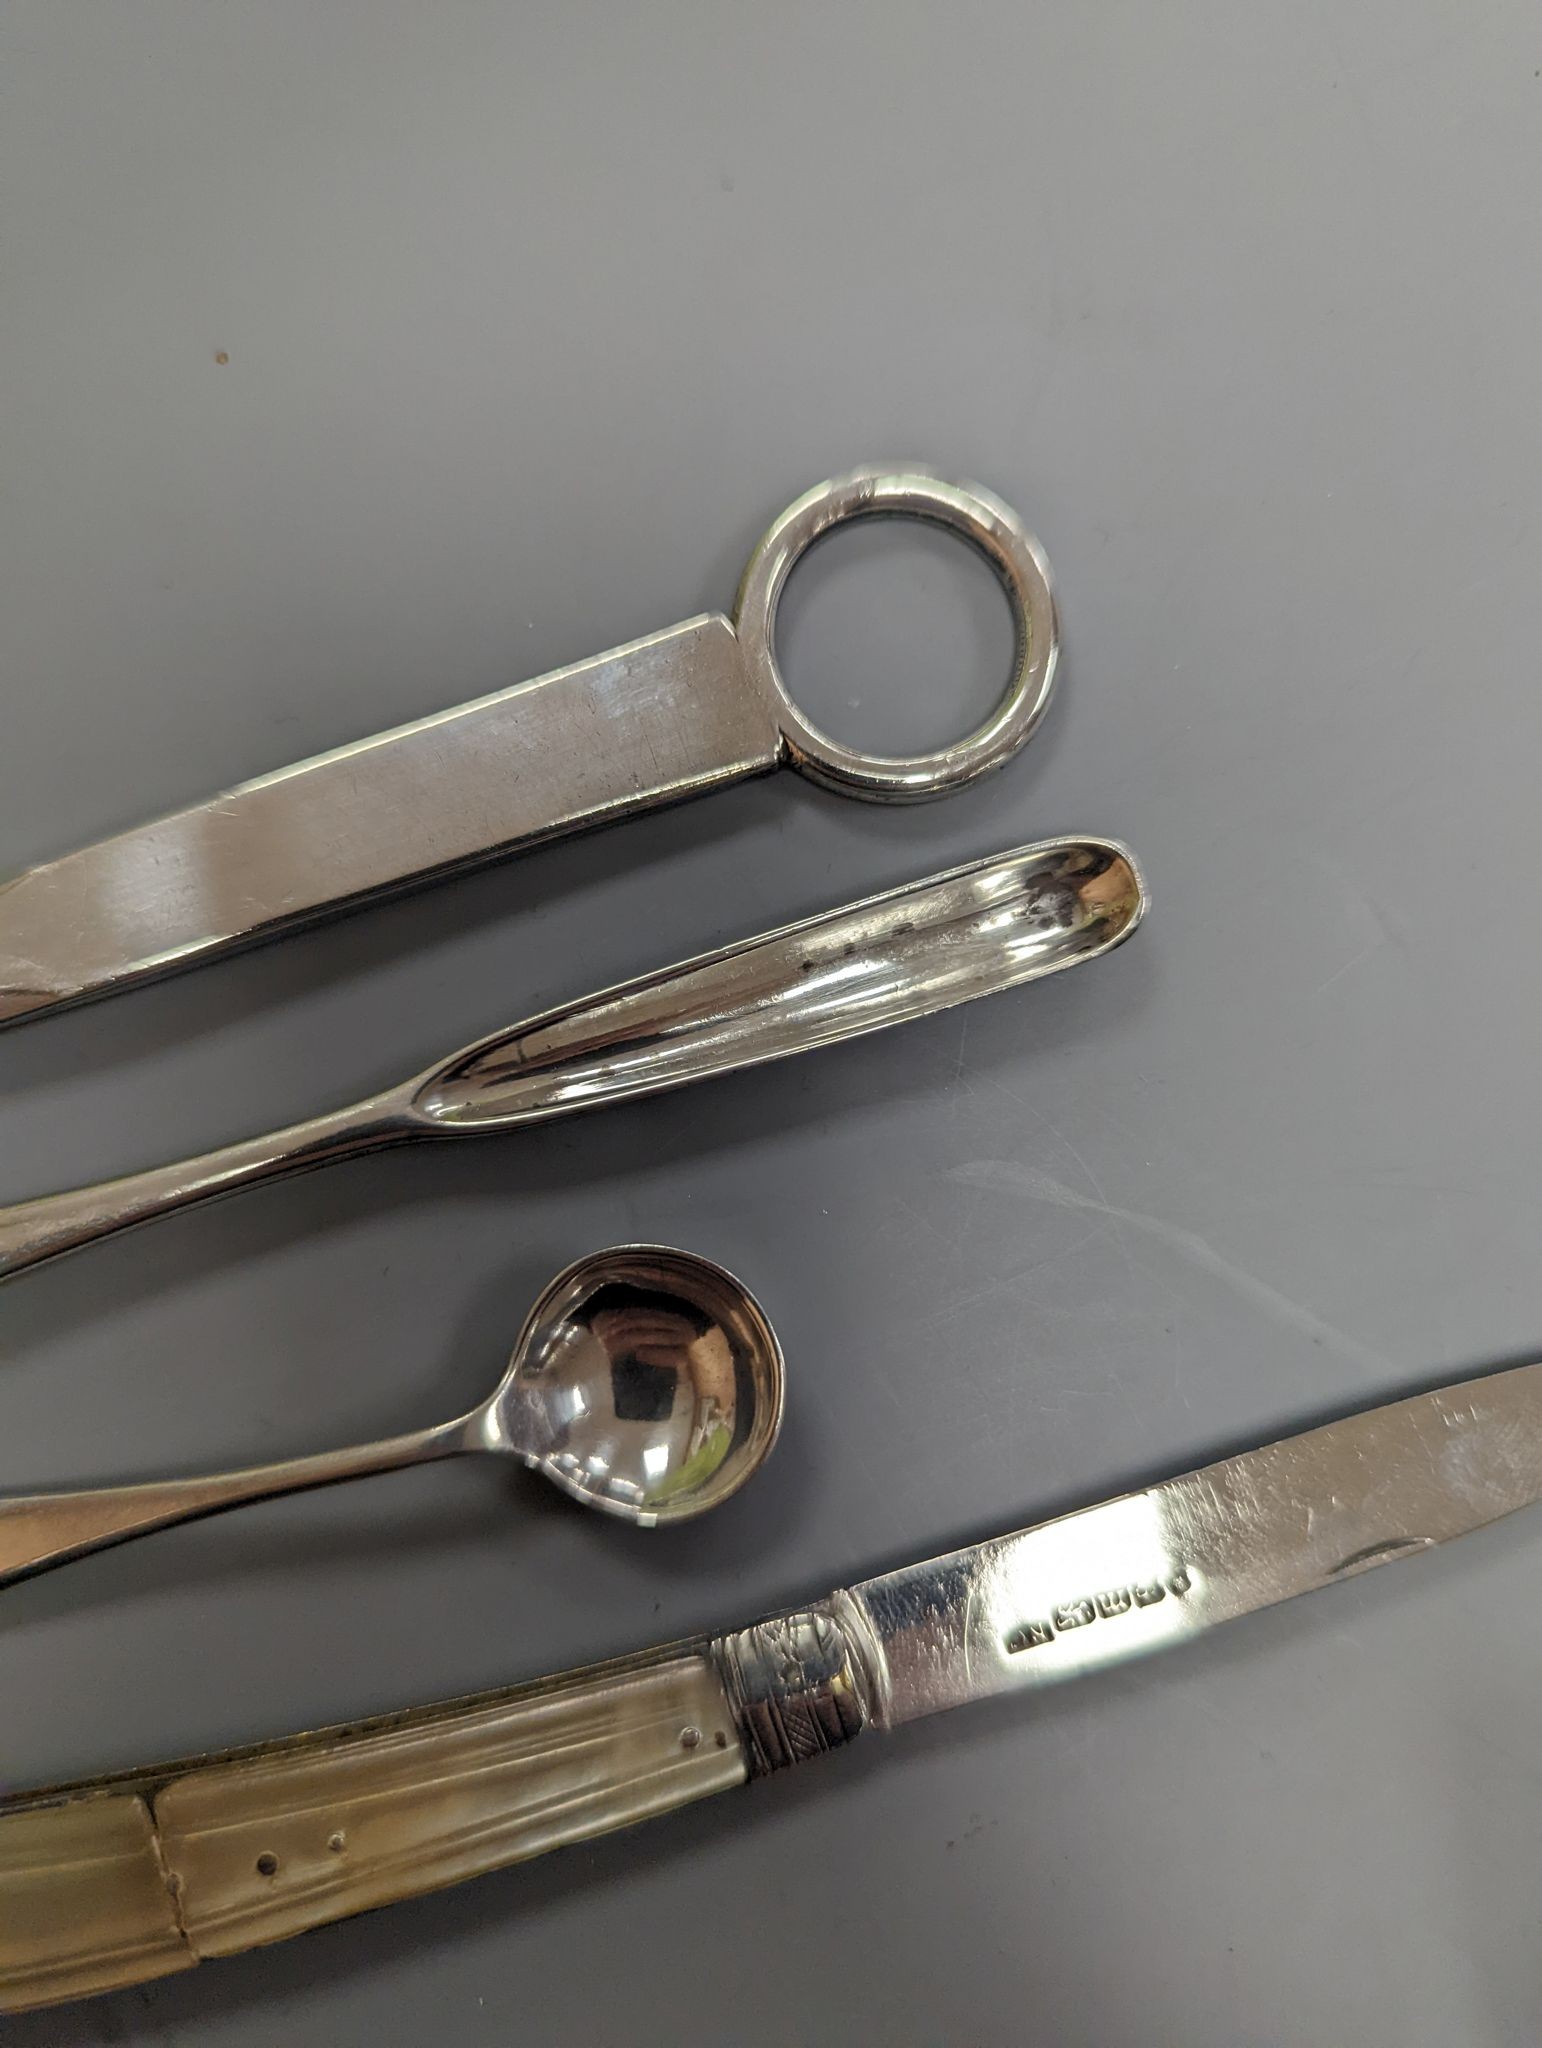 A George VI silver paper knife, London, 1937, a plated toddy ladle, two pairs of silver sugar tongs, damaged silver fruit knife and two other items.